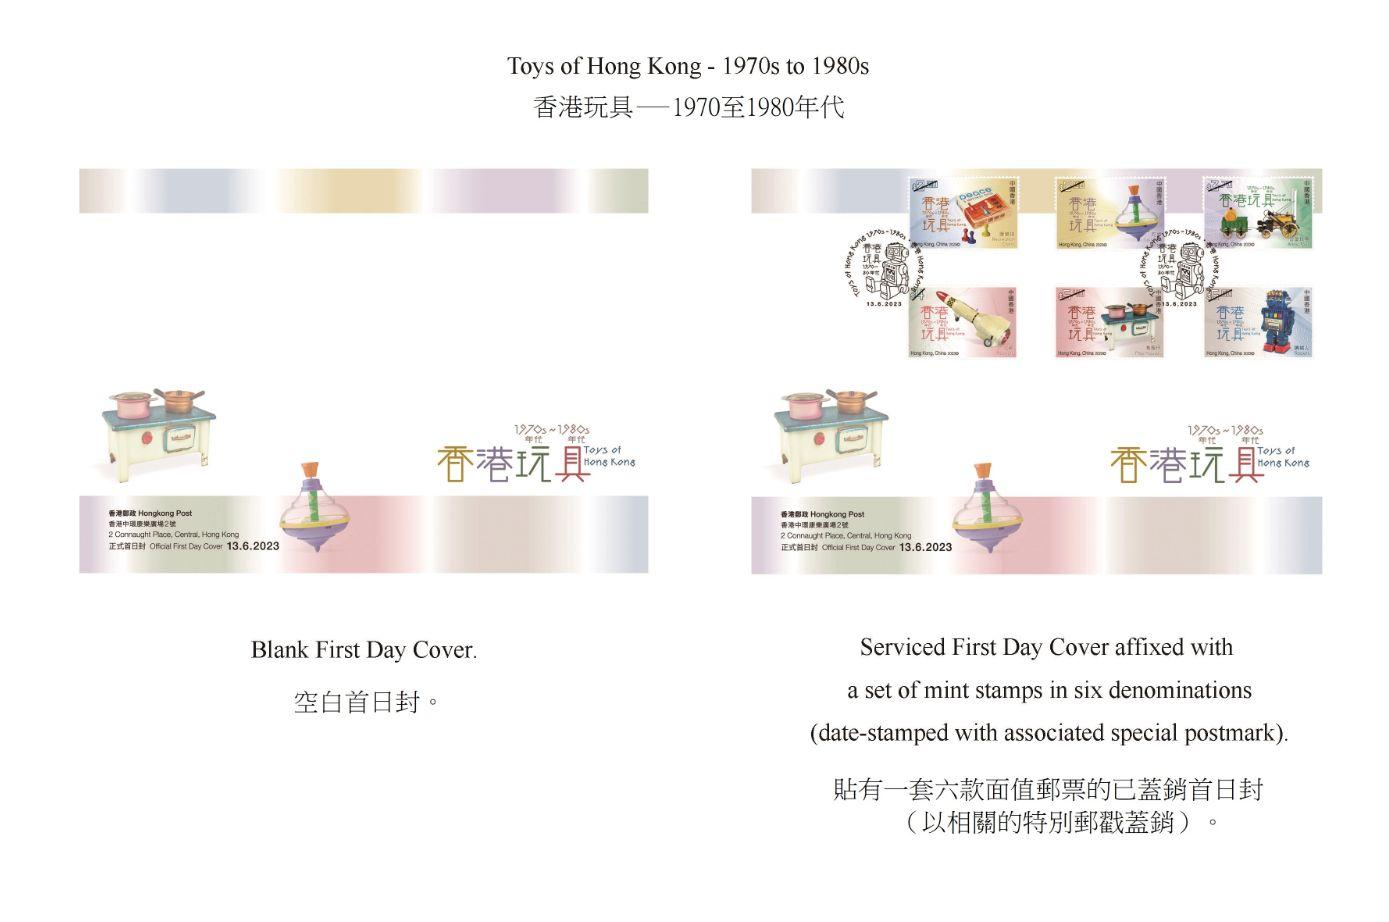 Hongkong Post will launch a special stamp issue and associated philatelic products on the theme of "Toys of Hong Kong - 1970s to 1980s" on June 13 (Tuesday). Photos show the first day covers.
